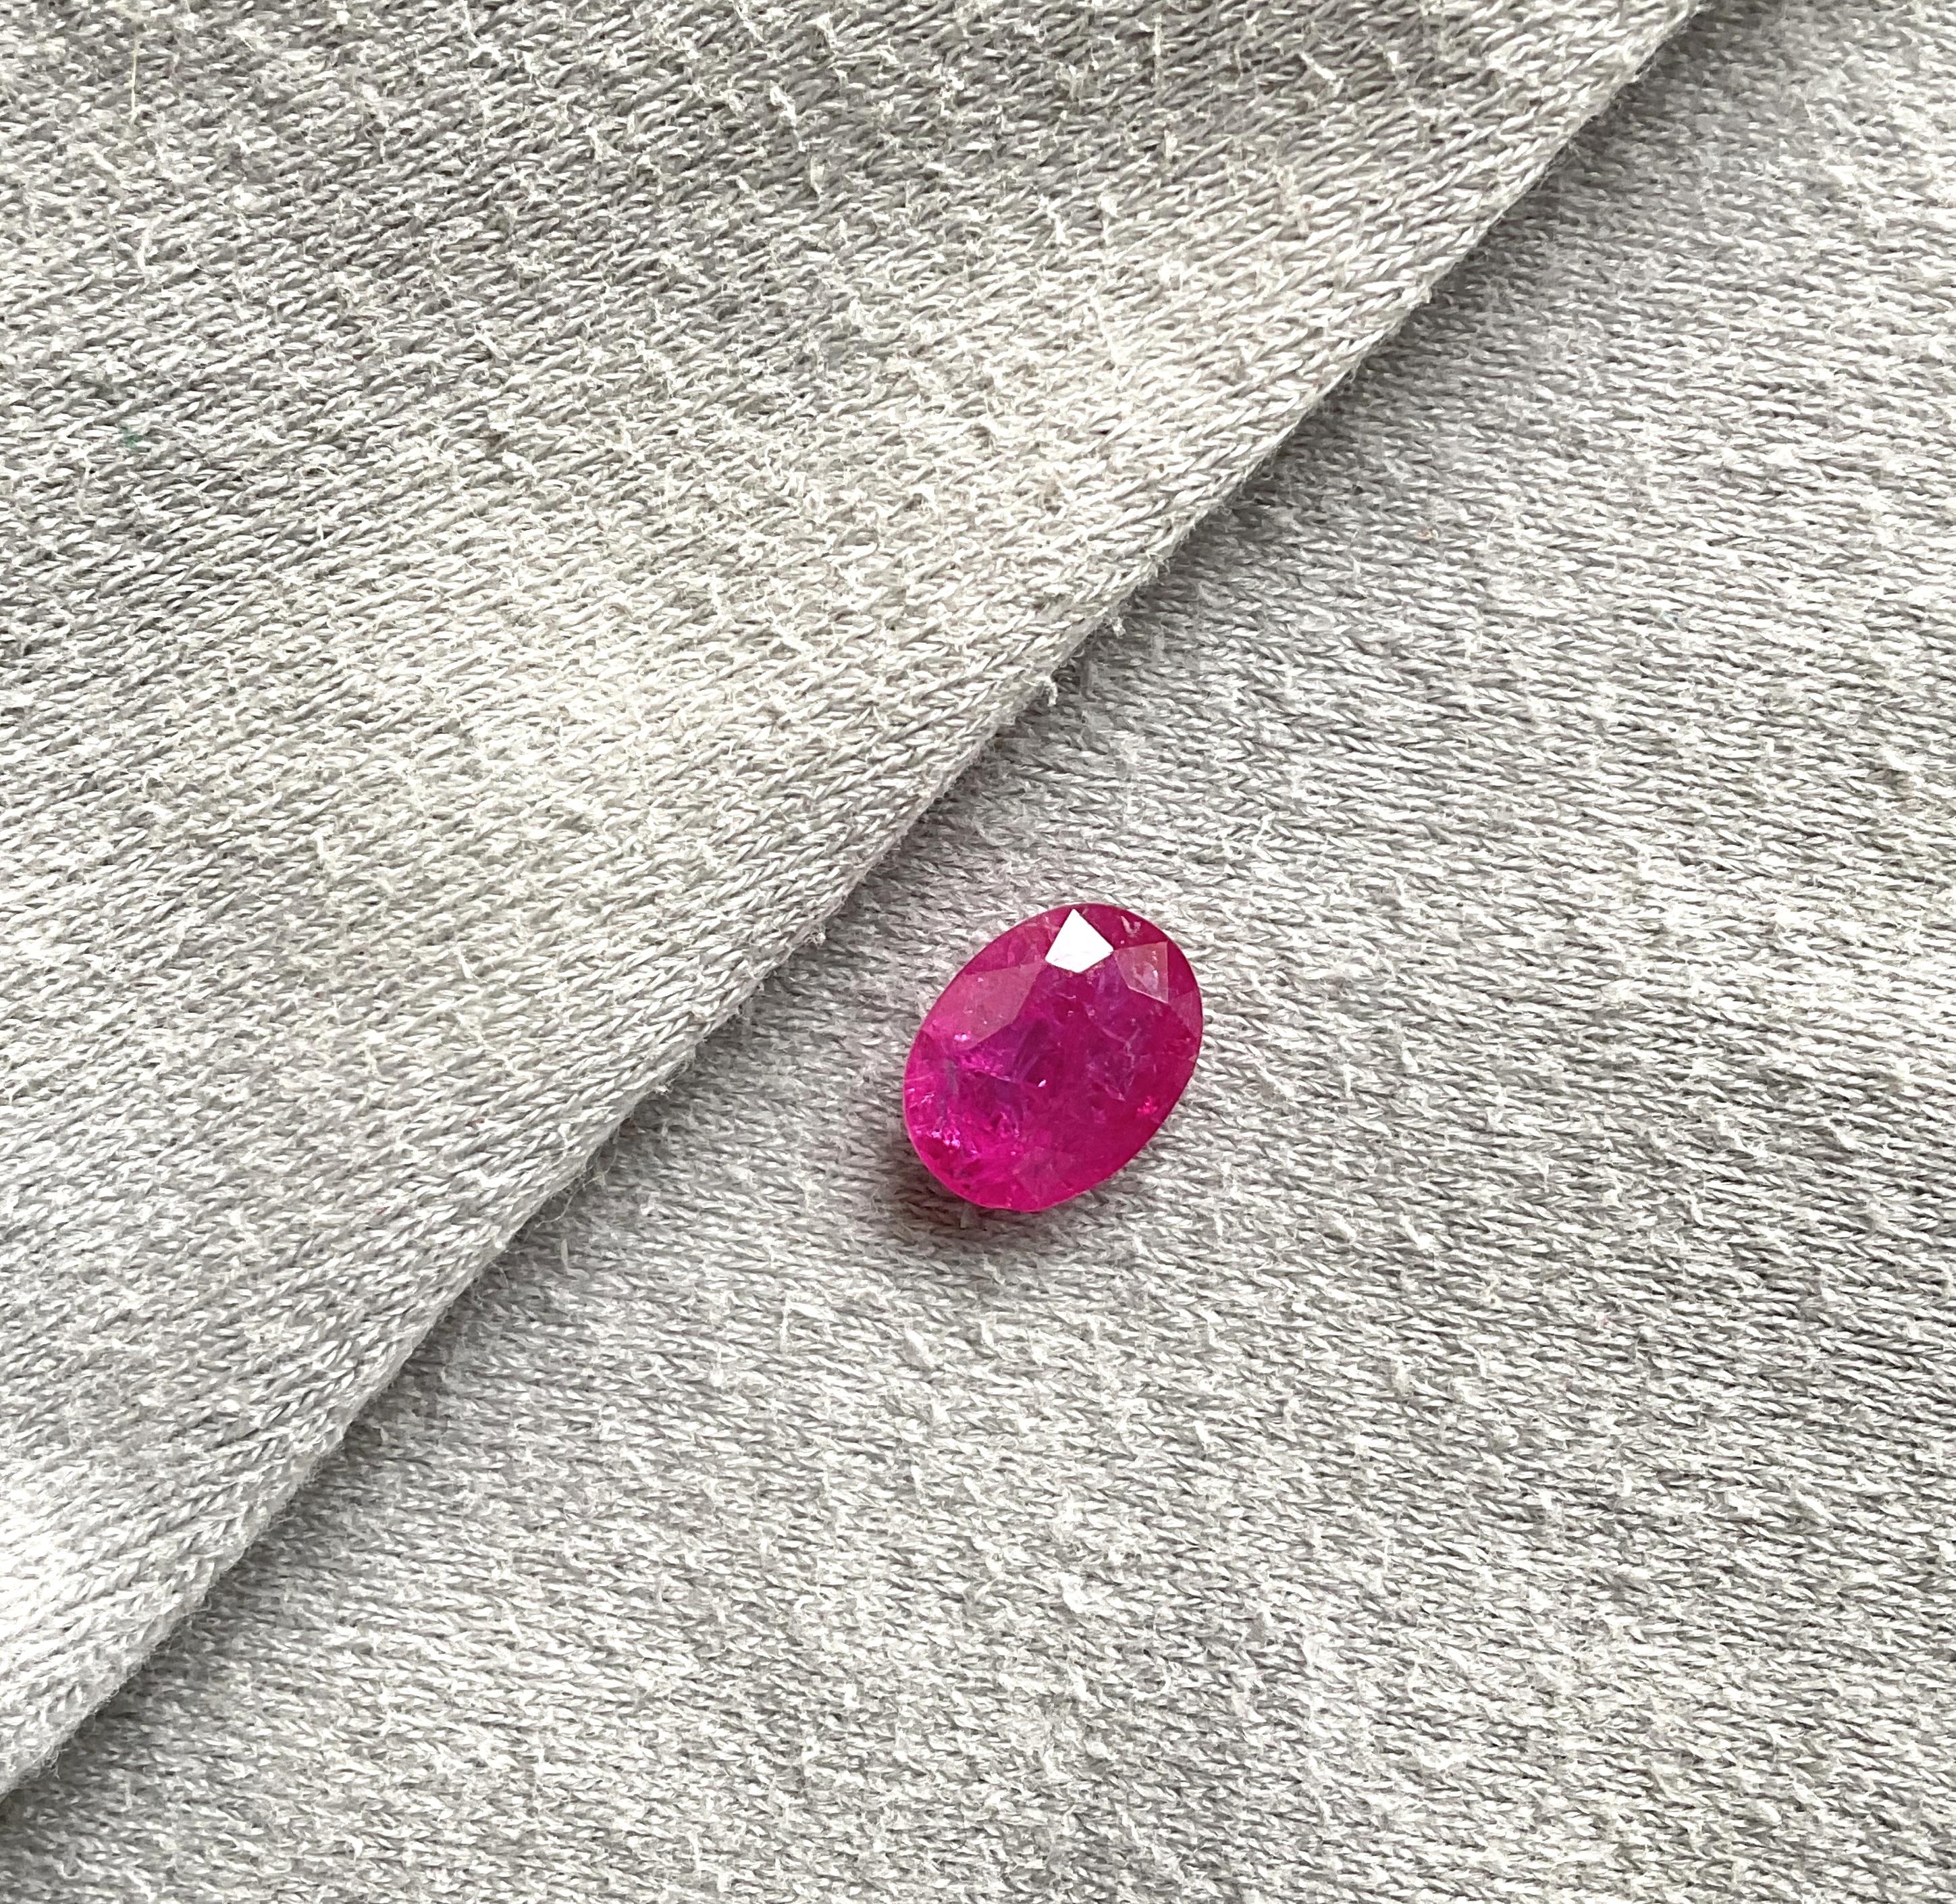 Oval Cut Certified 3.16 Carats Mozambique Ruby Oval Faceted Cutstone No Heat Natural Gem For Sale